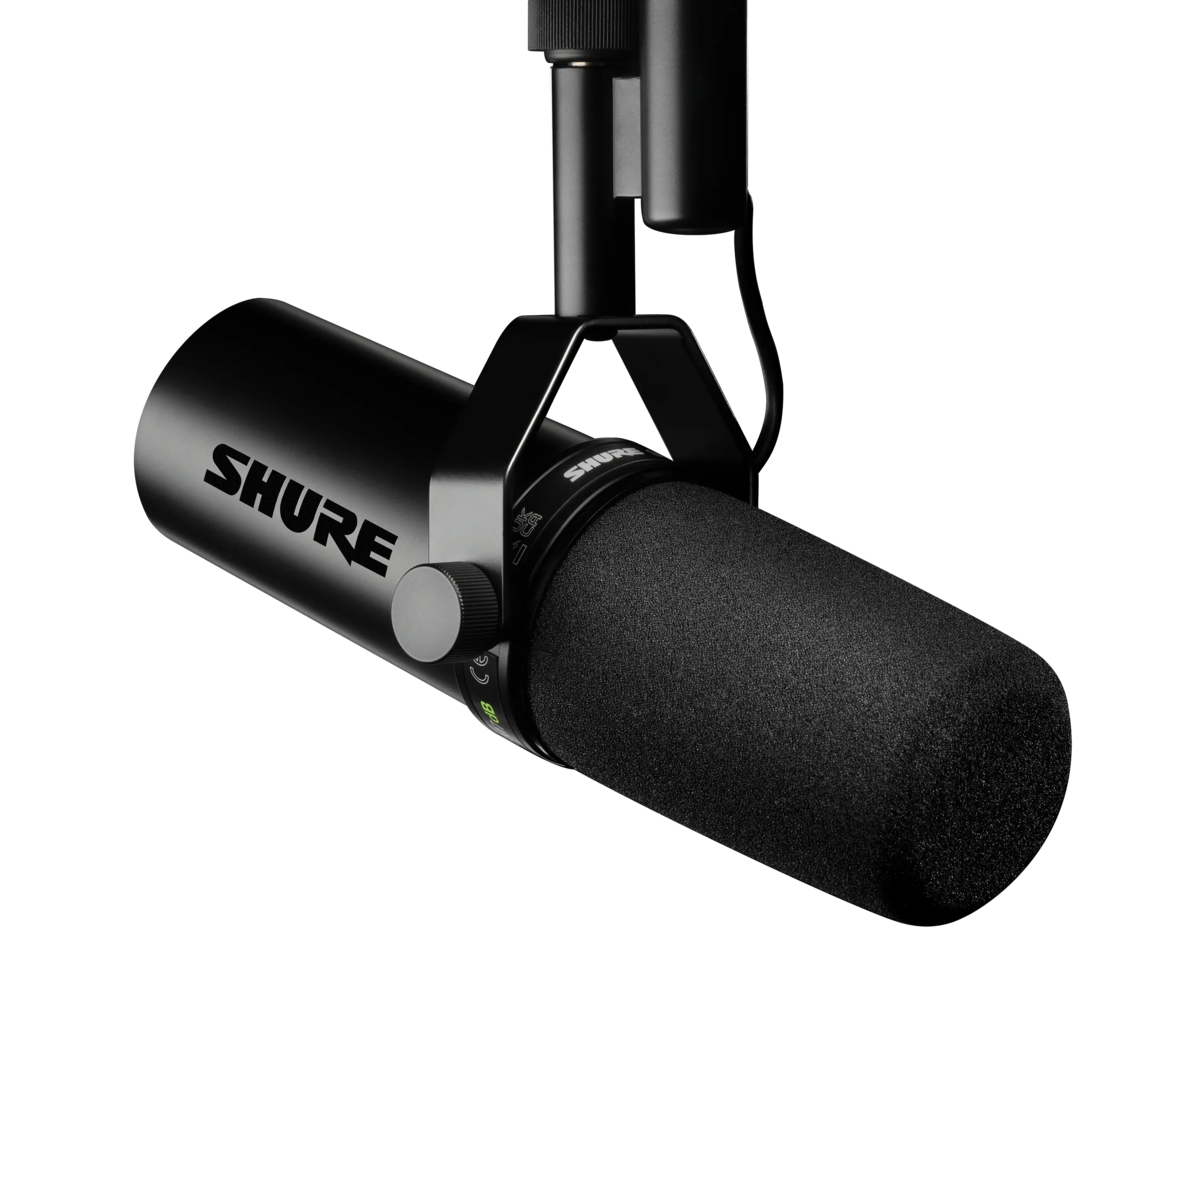 The new Shure SM7dB microphone!